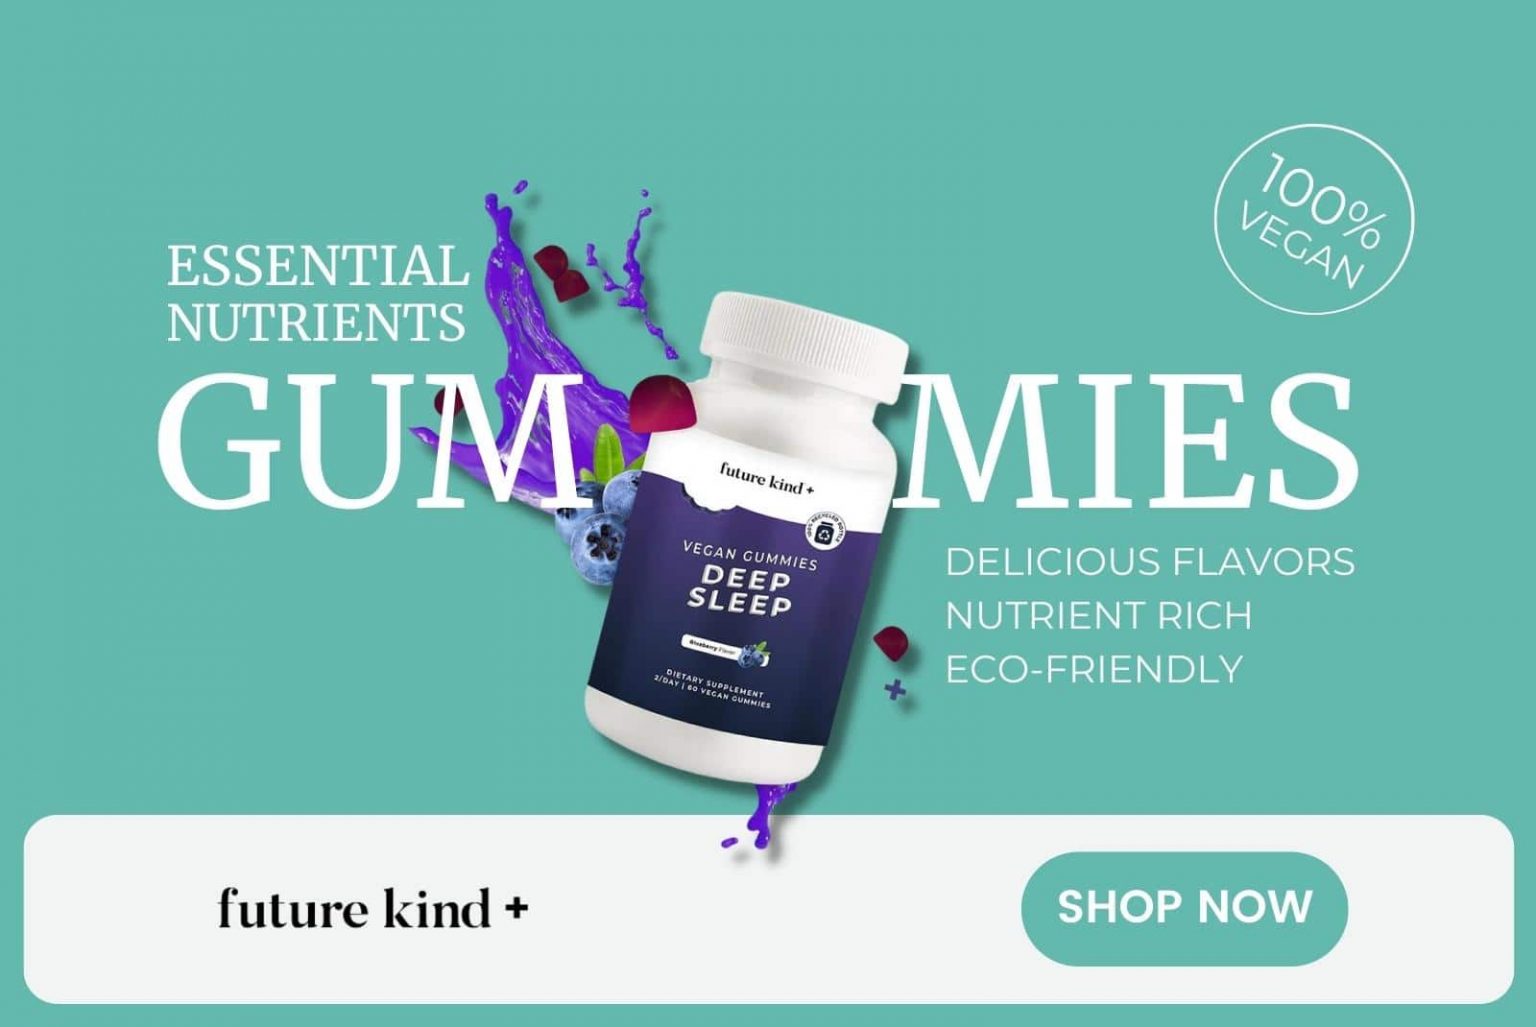 Future kind+ delicious gummy vitamins and gummy multivitamins, cover all your vegan essential nutrient needs.